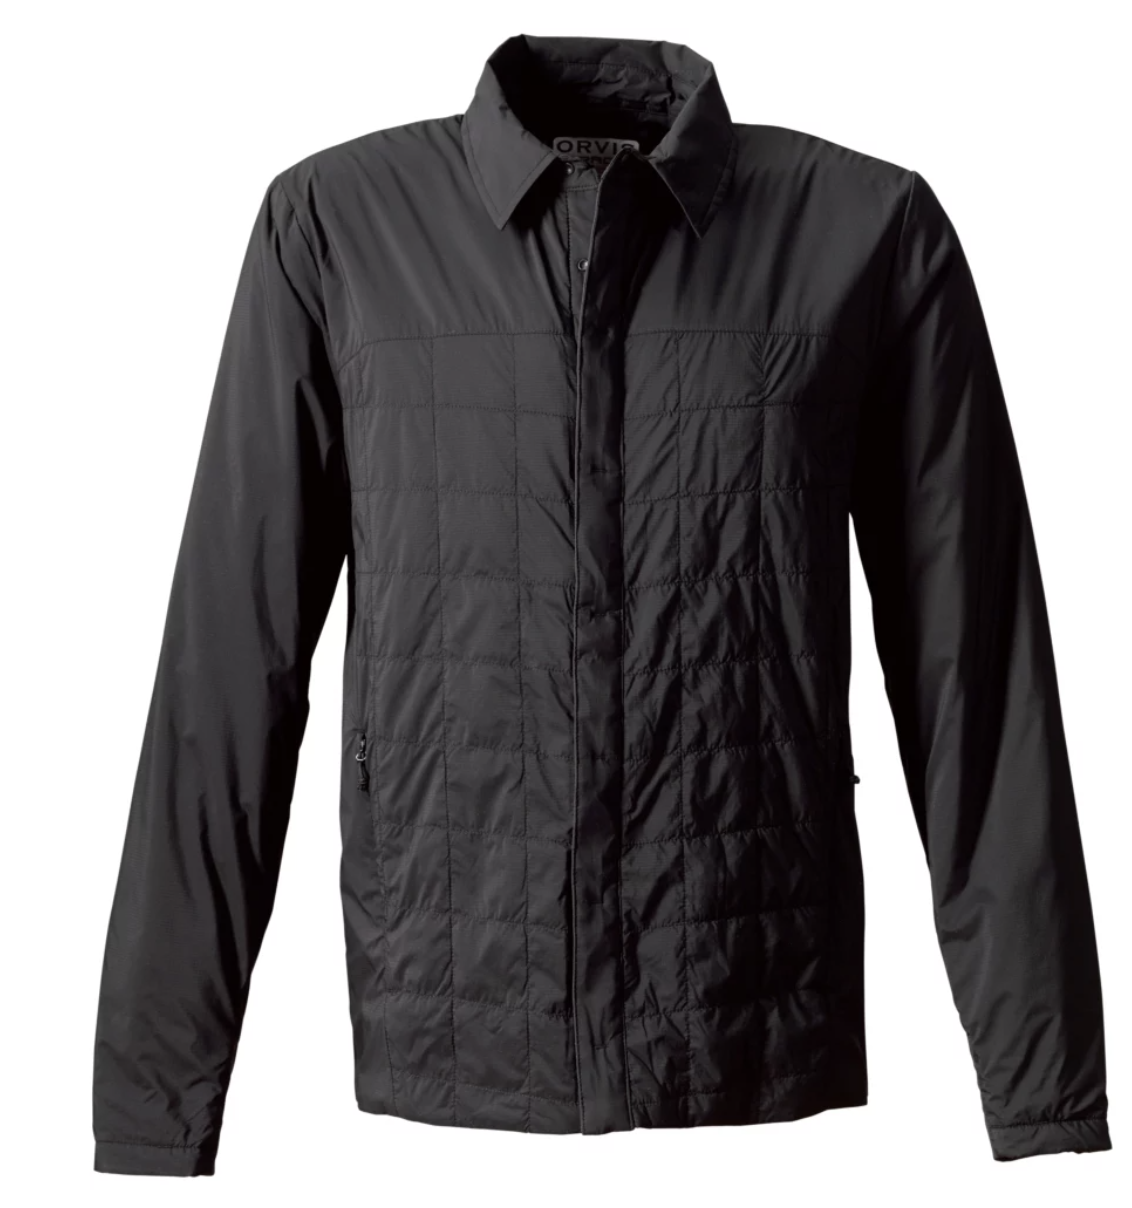 Orvis Orvis Pro Insulated Shirt Jacket